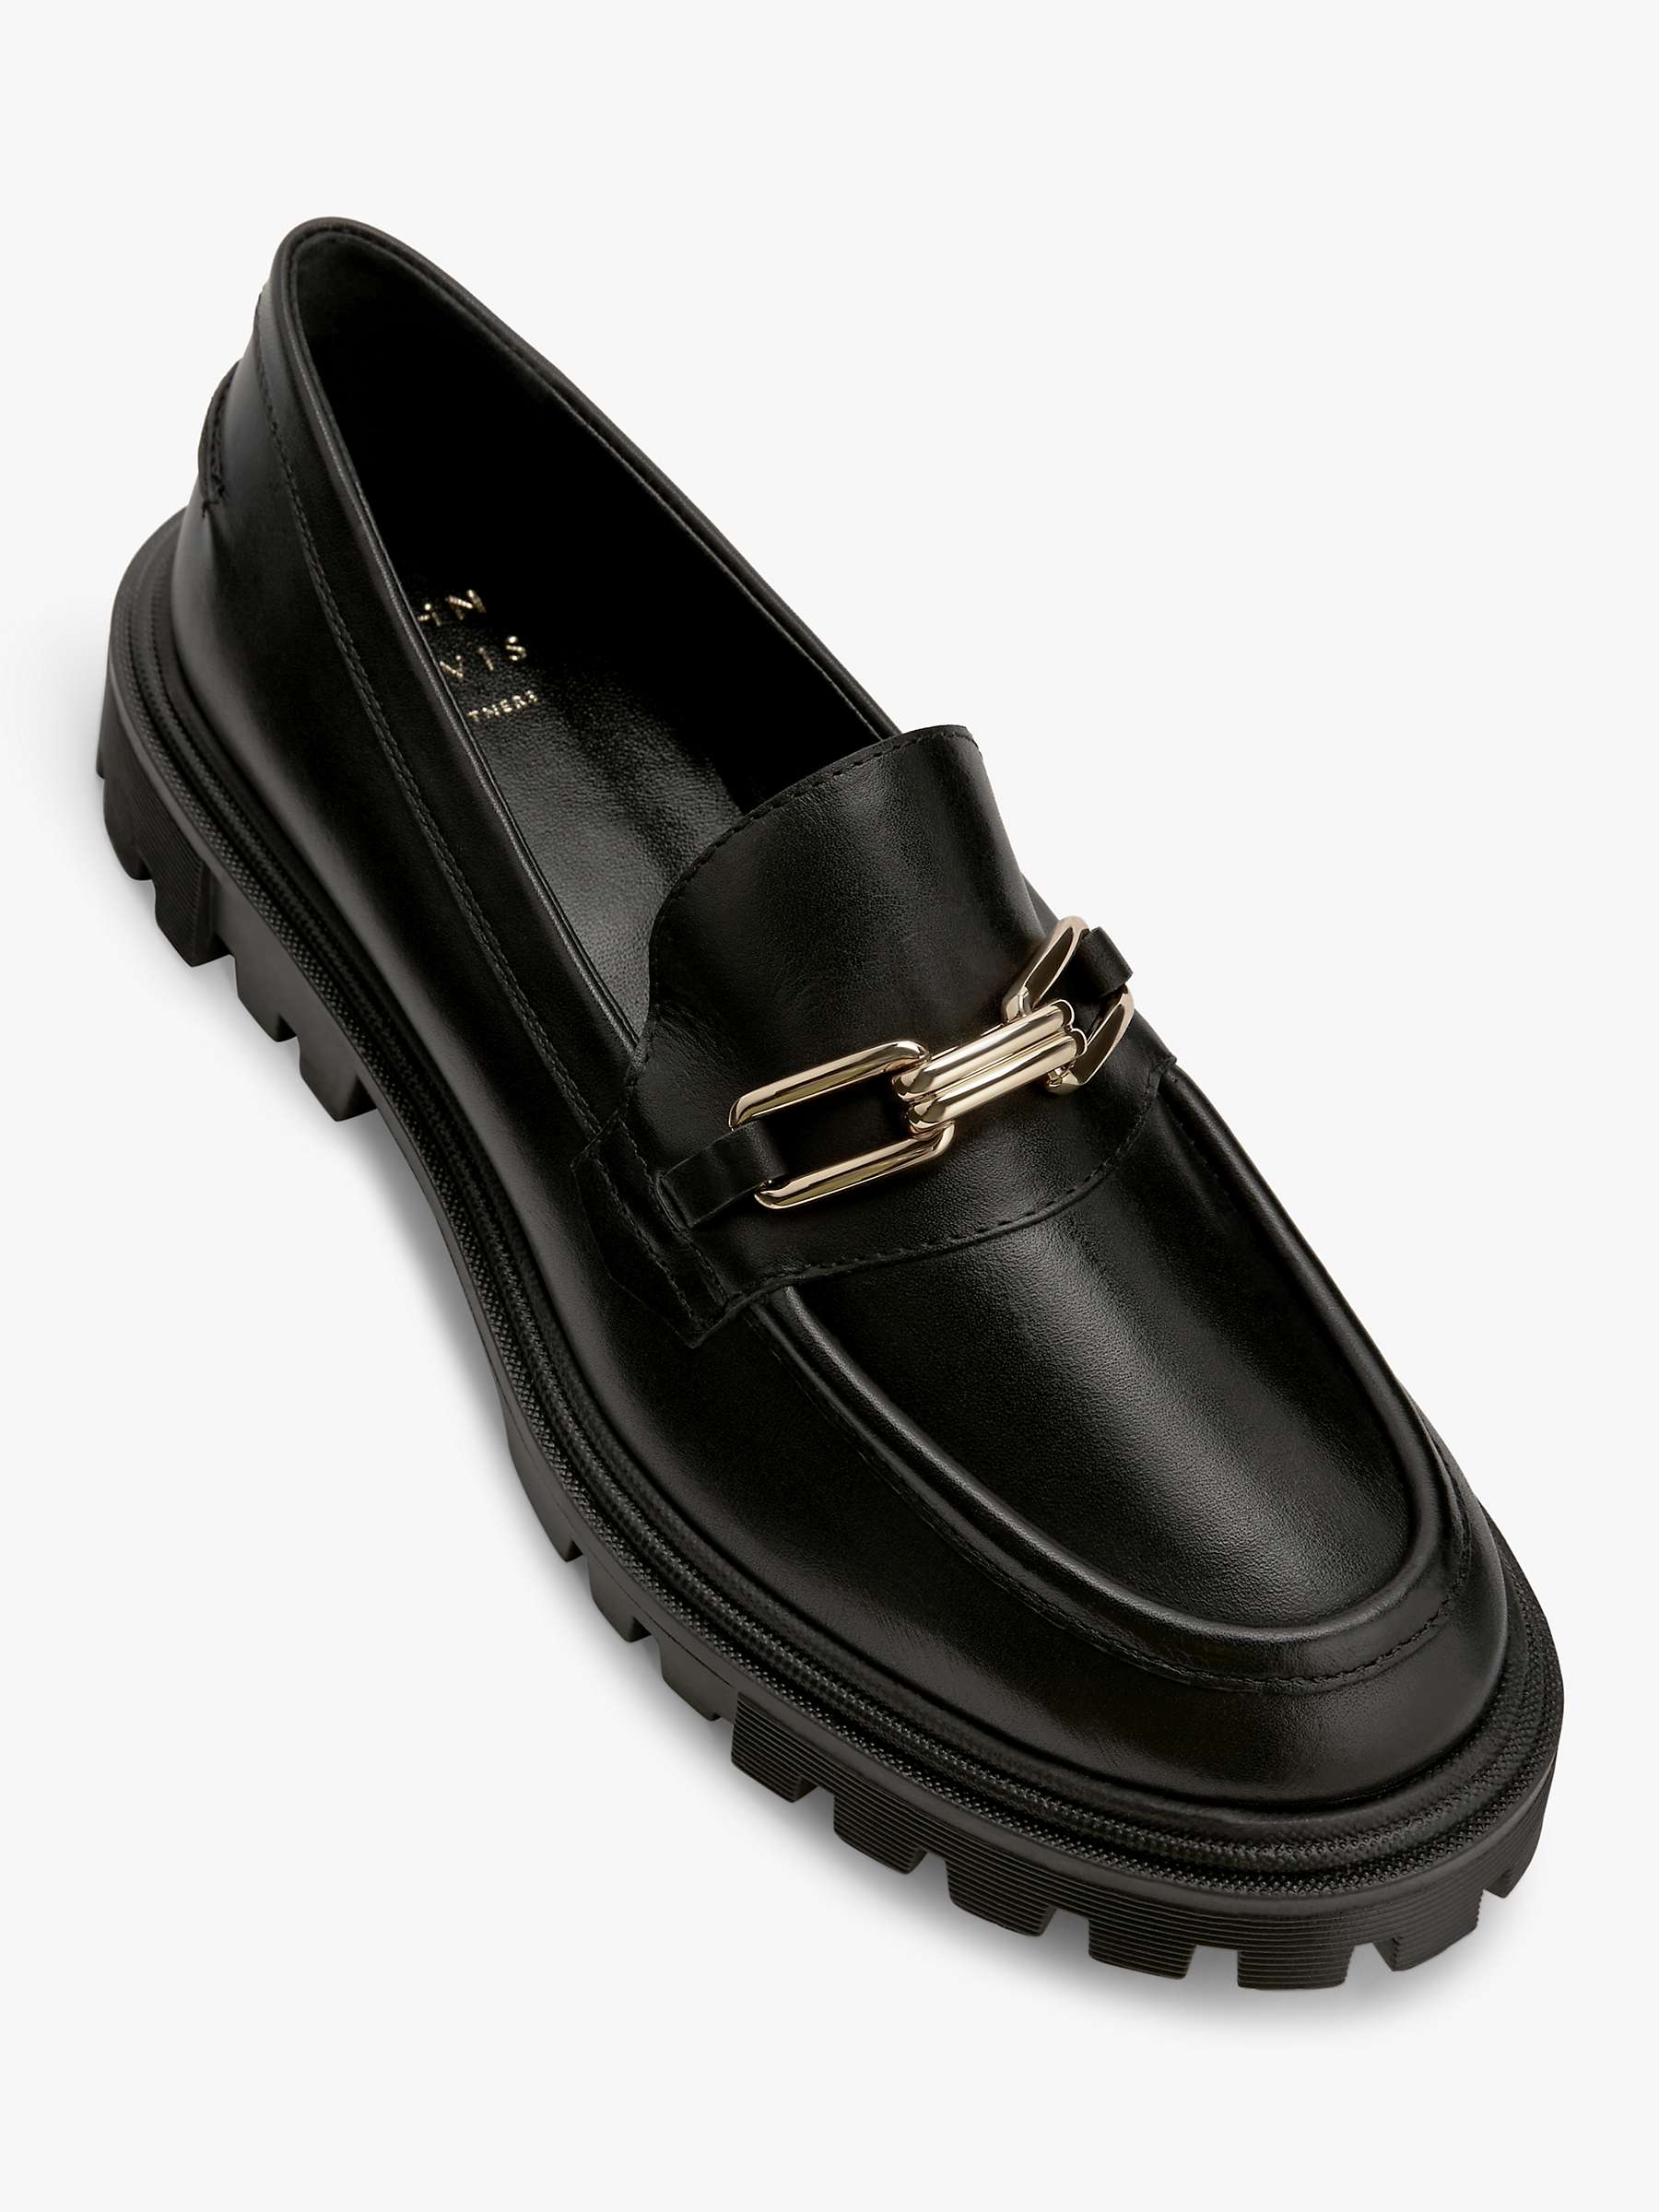 Buy John Lewis Glowing Leather Chunky Platform Loafers Online at johnlewis.com